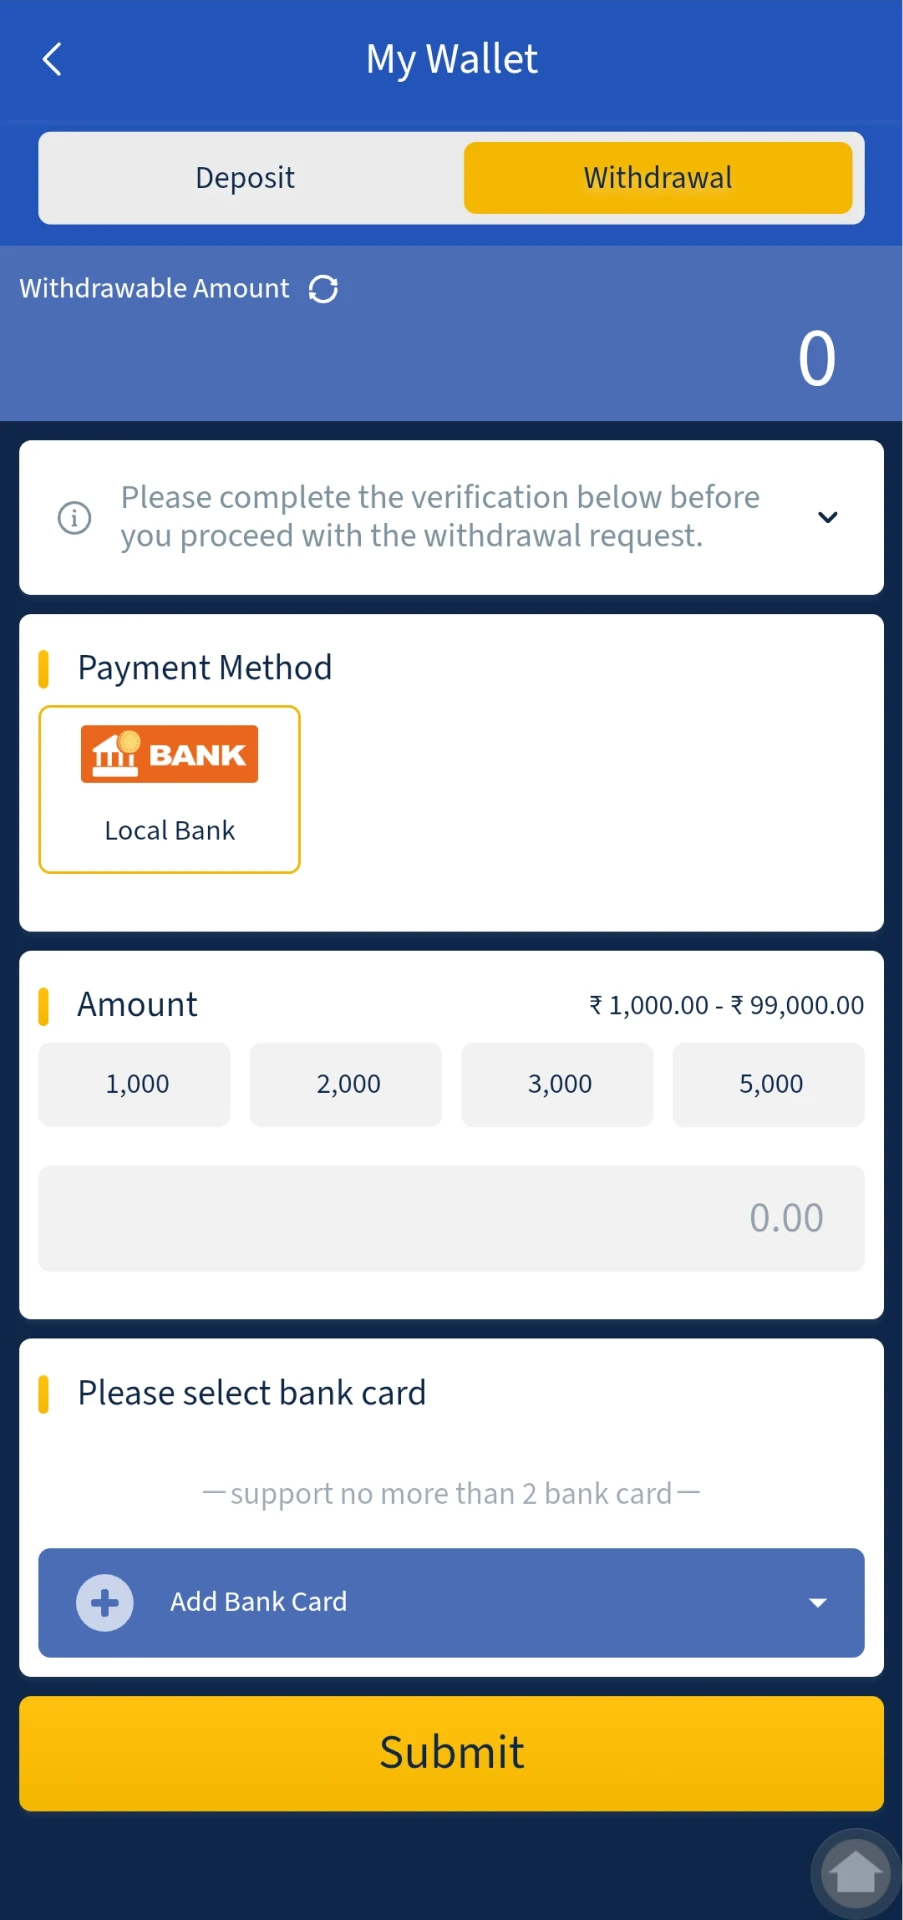 Select the payment system for withdrawal.